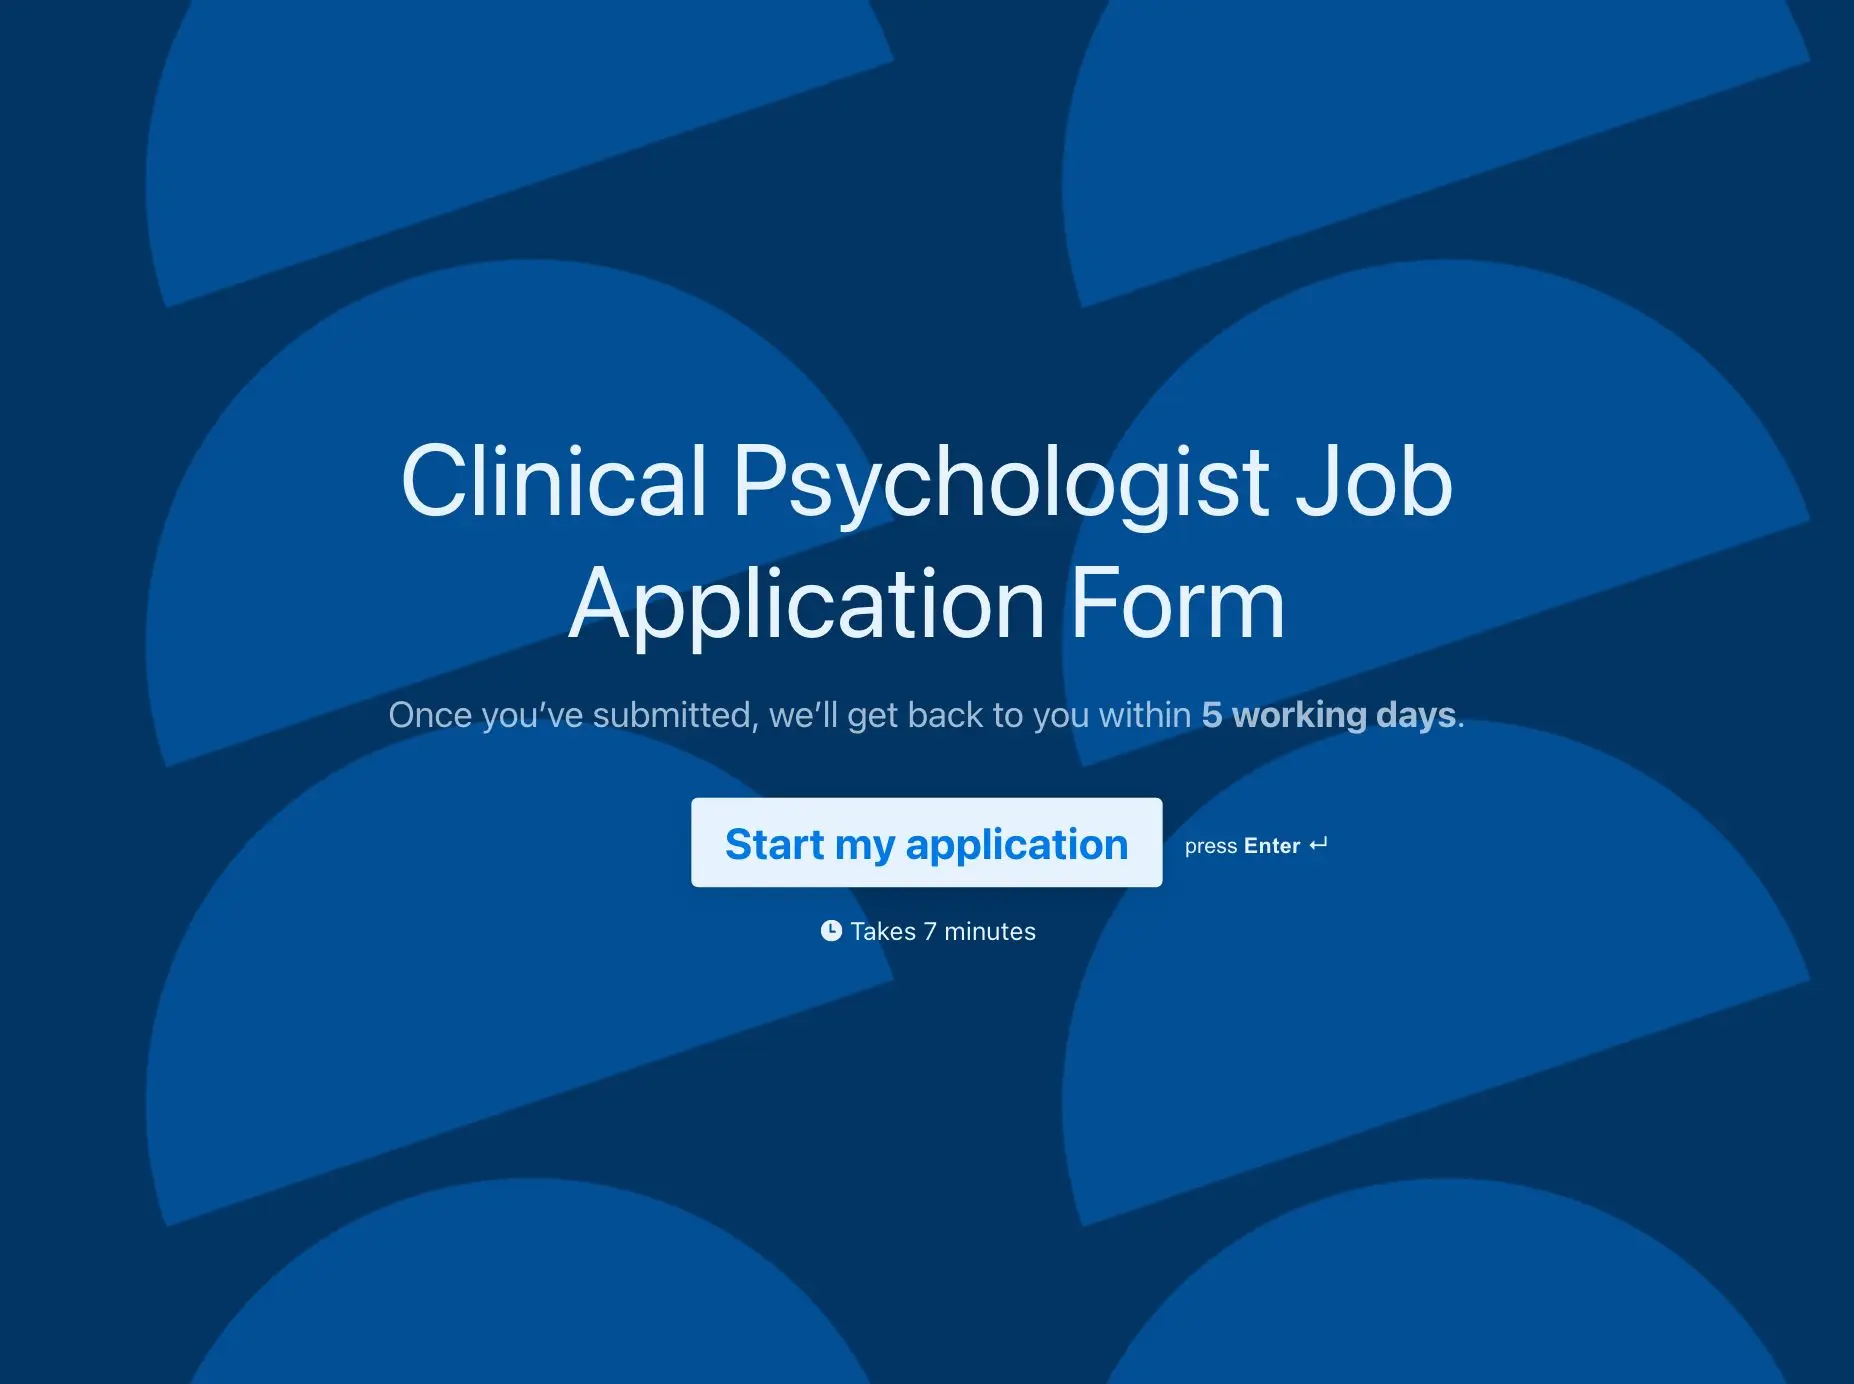 Clinical Psychologist Job Application Form Template Hero